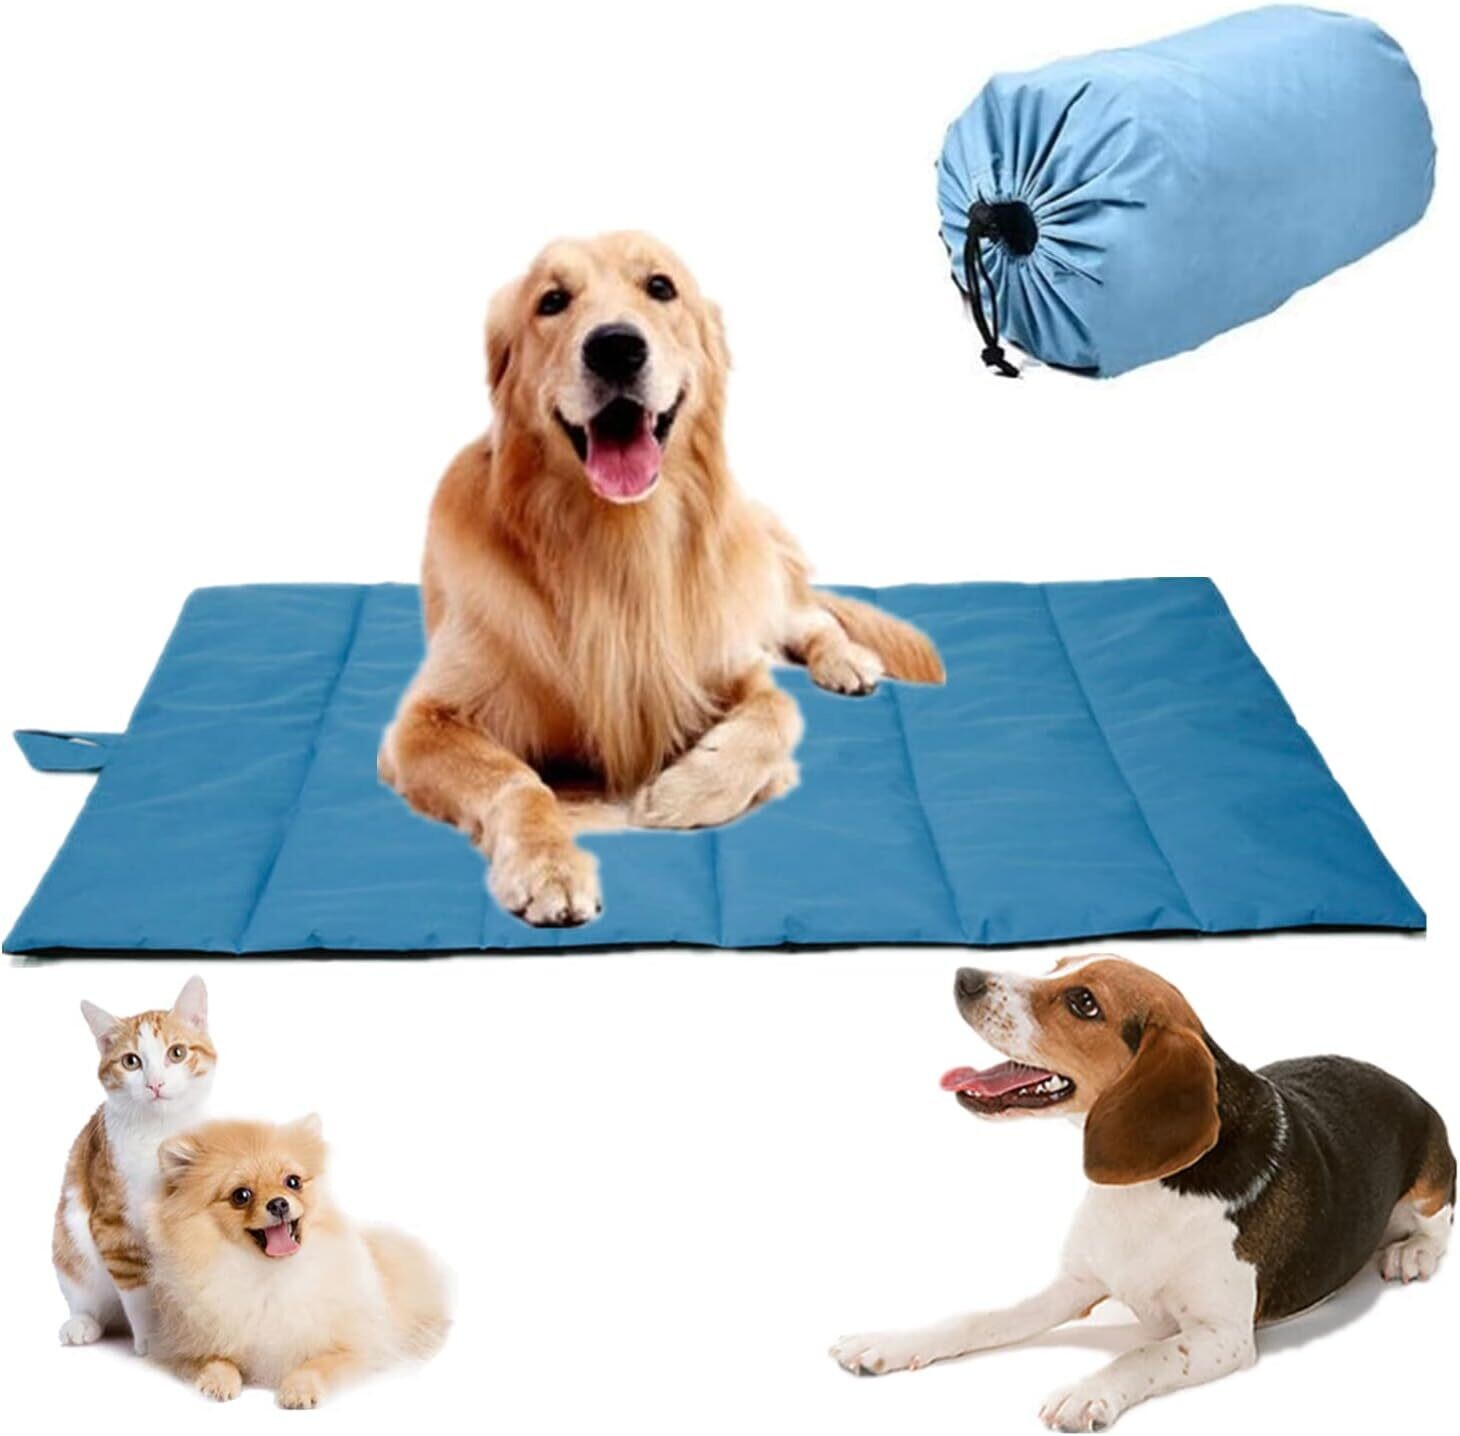 Large Dogs Foldable Washable Waterproof Dog Mat for Outdoor Use, Pet-Friendly Portable Dog Mat Travel Blanket for Dogs and Cats with Multiple Uses: Picnic Blanket 110 by 68 cm.